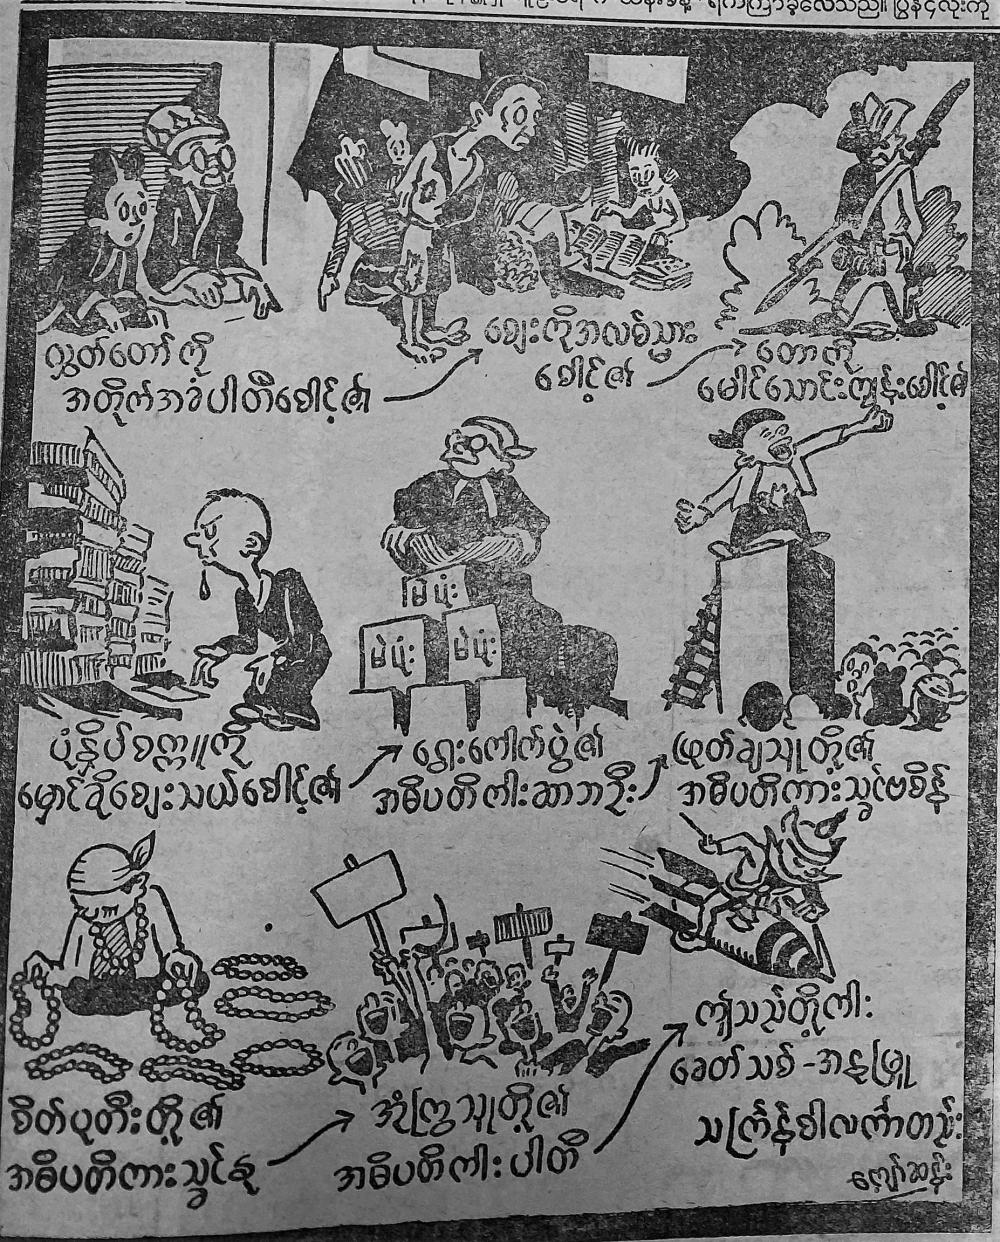 A cartoon published in The Rangoon Daily on April 4, 1951.